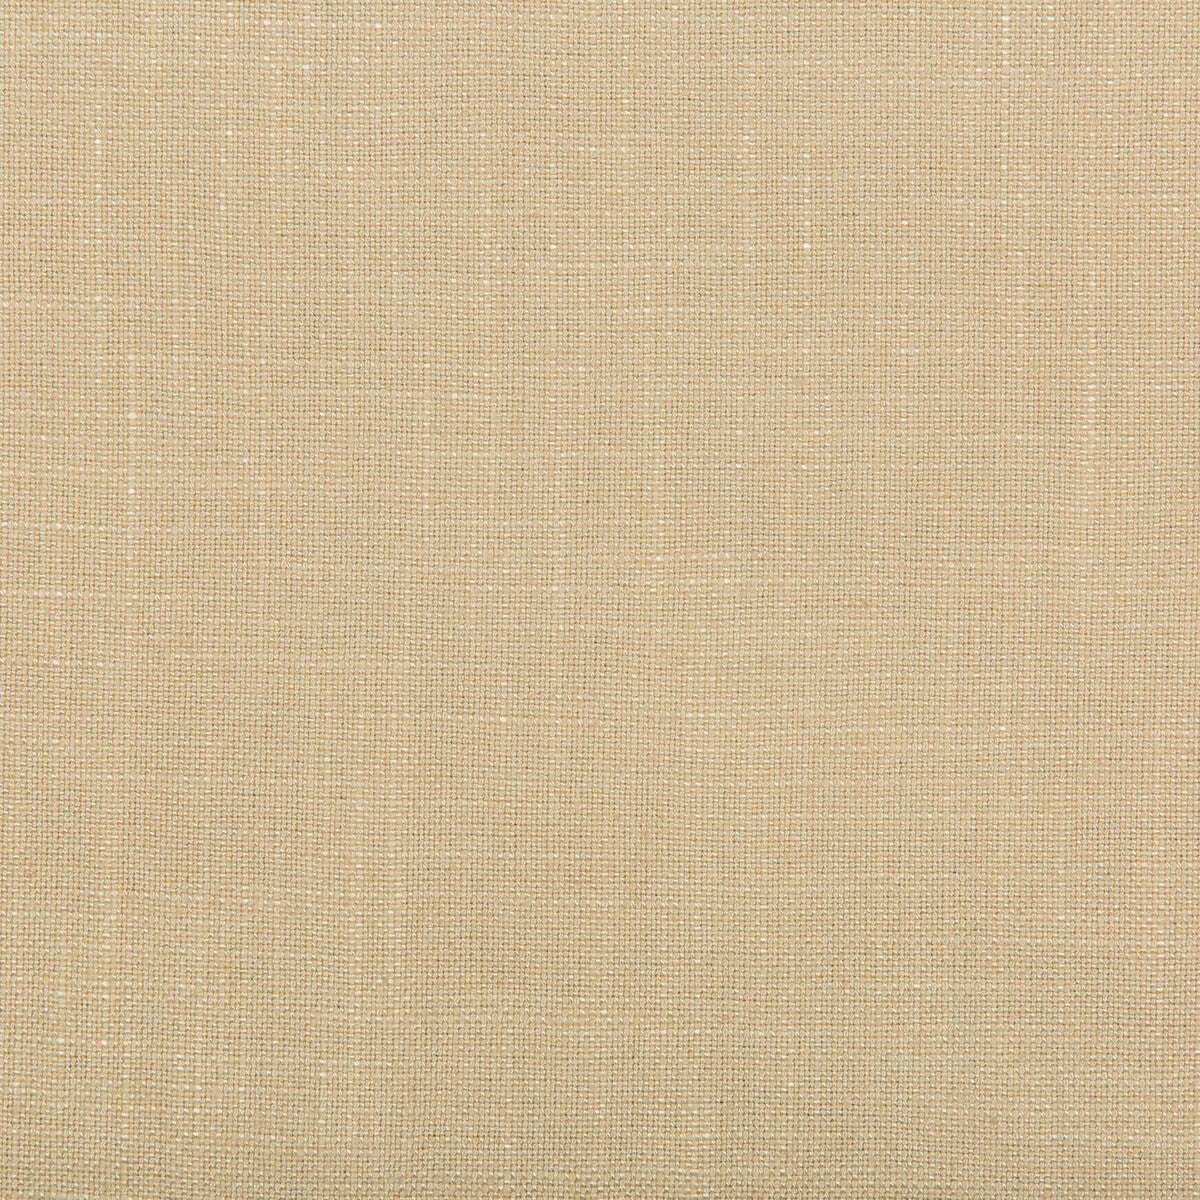 Aura fabric in shell color - pattern 35520.1611.0 - by Kravet Design